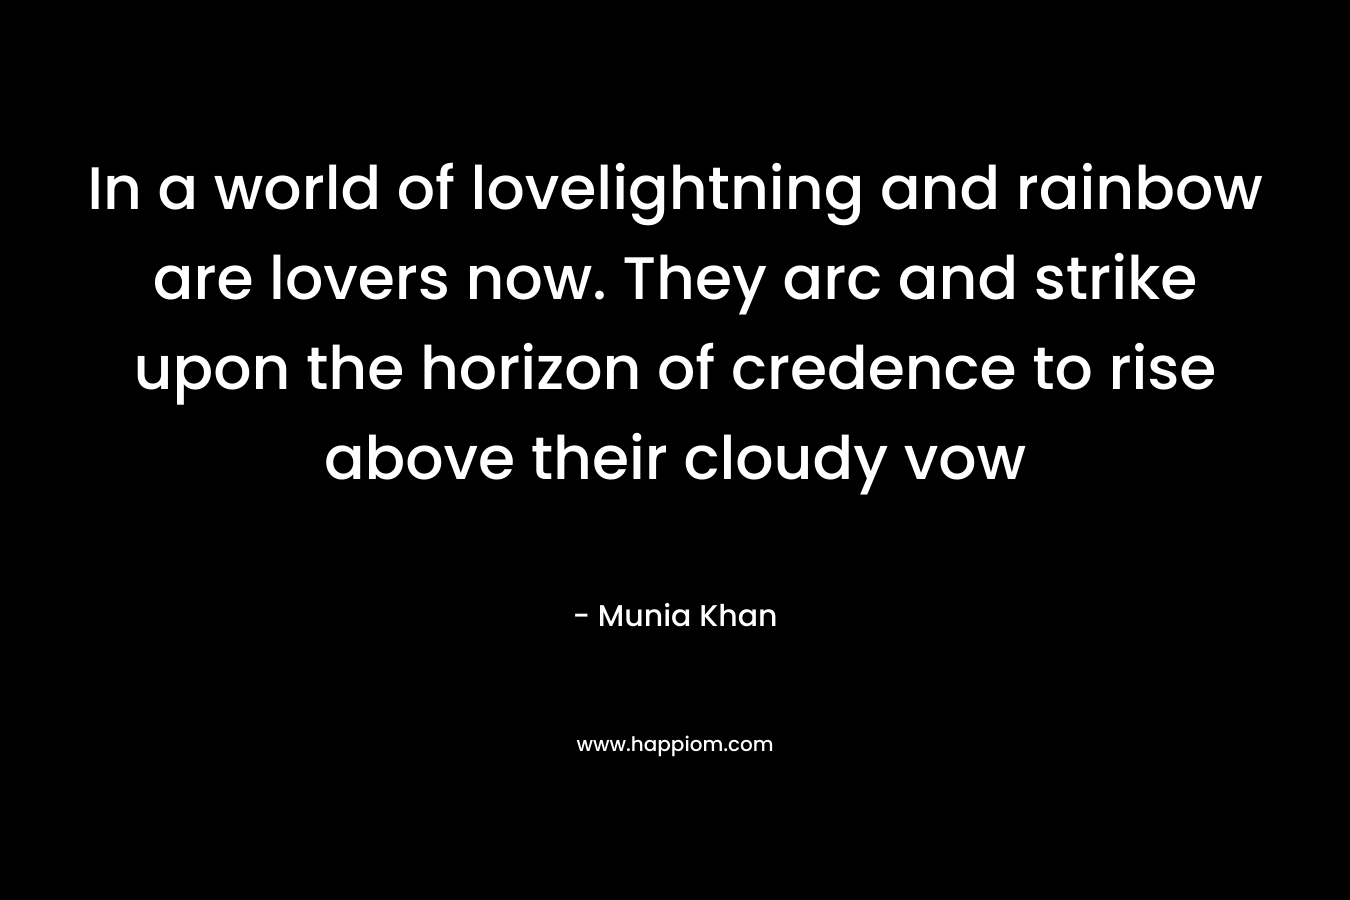 In a world of lovelightning and rainbow are lovers now. They arc and strike upon the horizon of credence to rise above their cloudy vow – Munia Khan